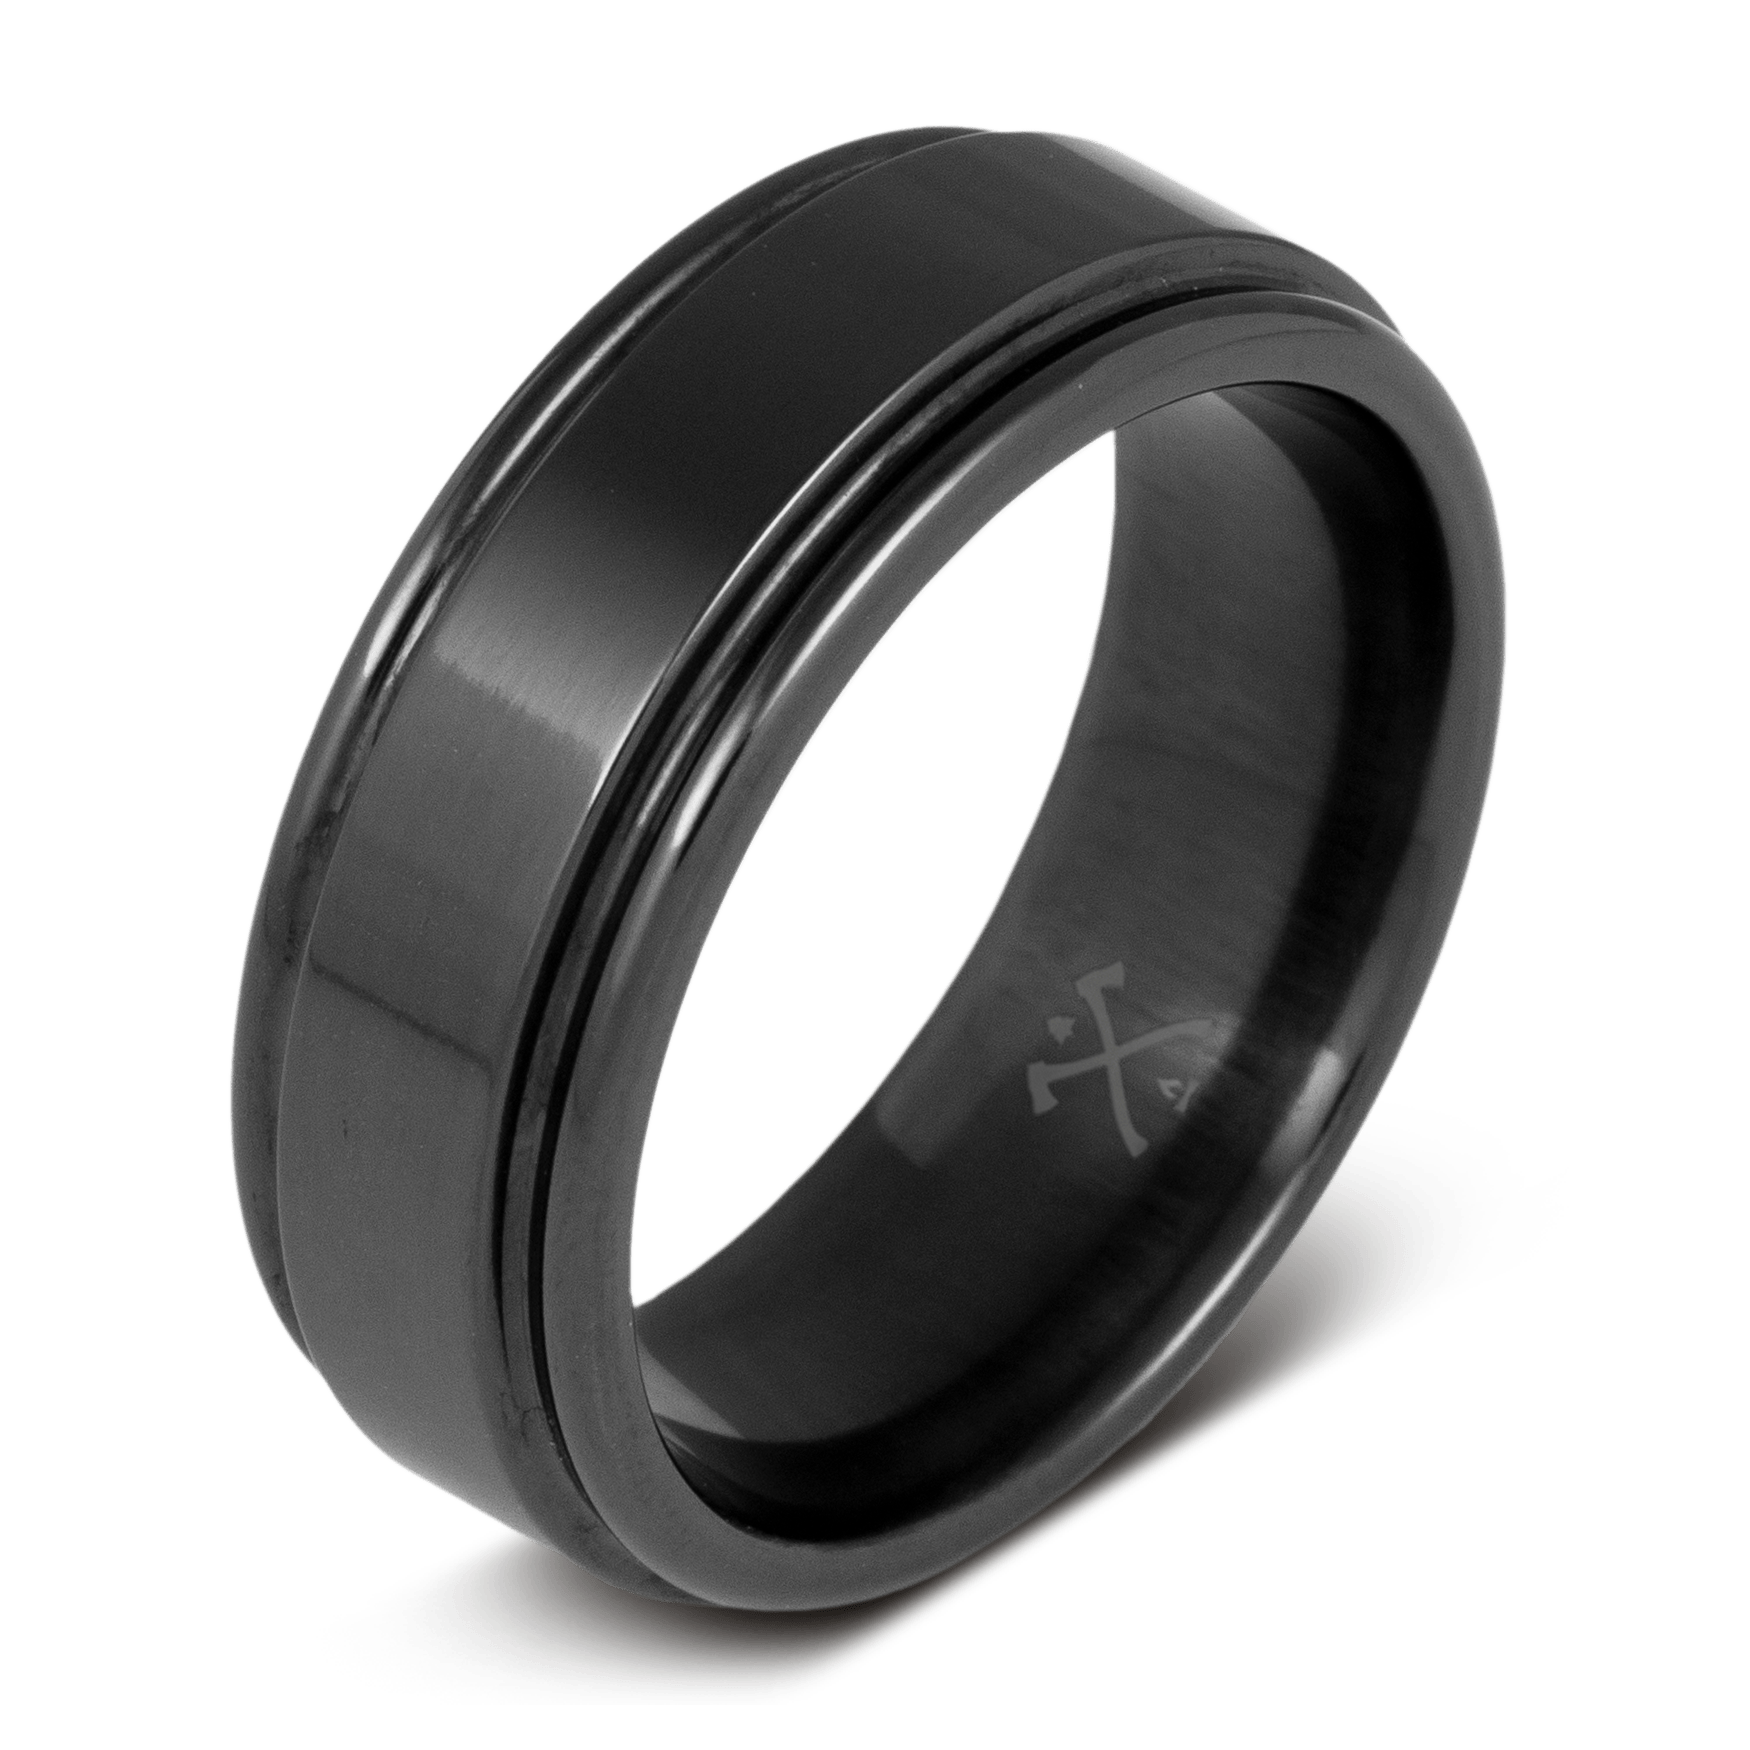 The Blacksmith black ring for men made with black zirconium with rounded edges